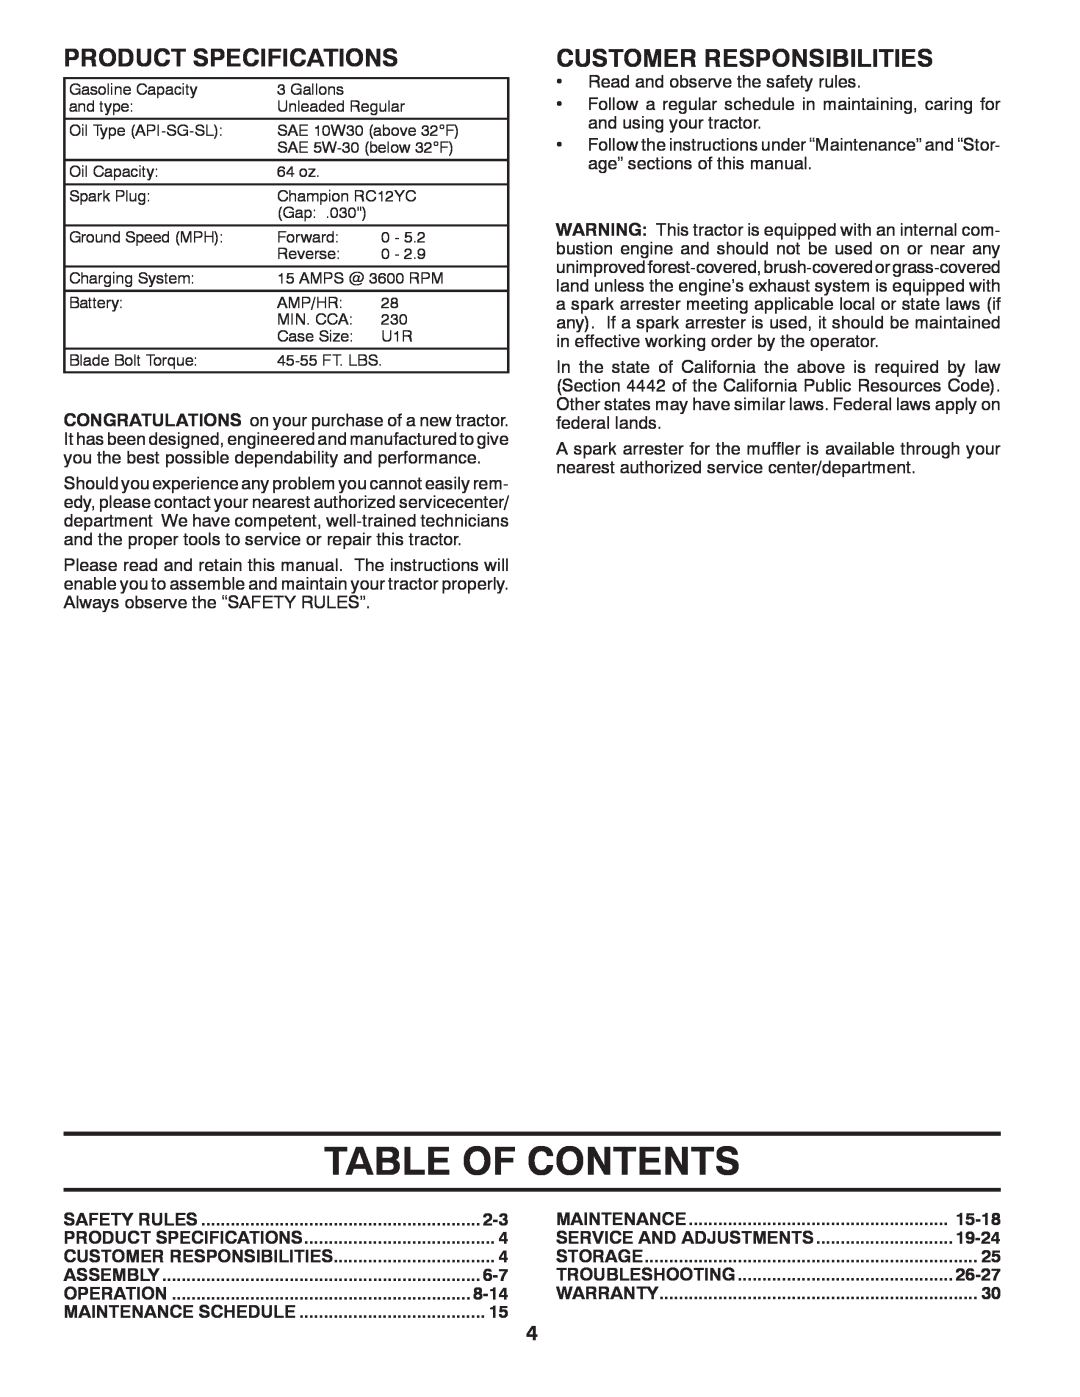 Dixon 433616, D22H46 manual Table Of Contents, Product Specifications, Customer Responsibilities, 8-14, 15-18, 19-24, 26-27 